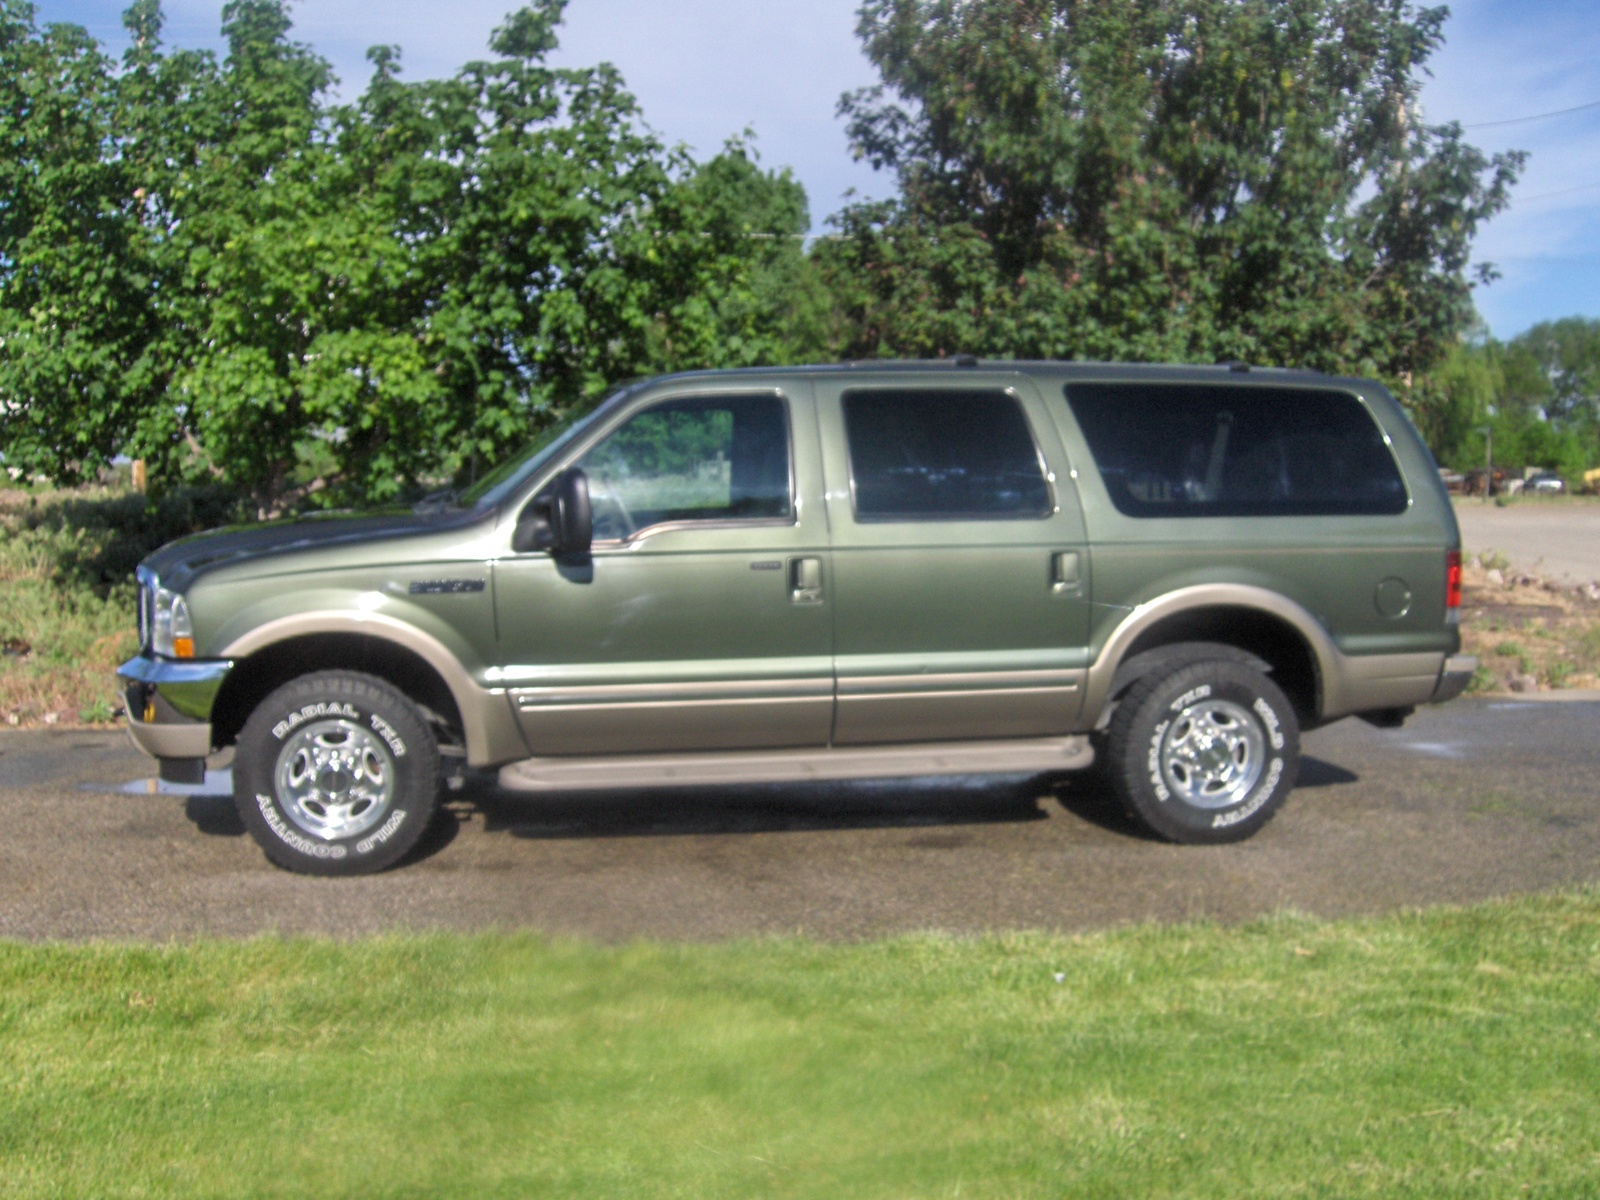 2002 Ford excursion limited specs #5